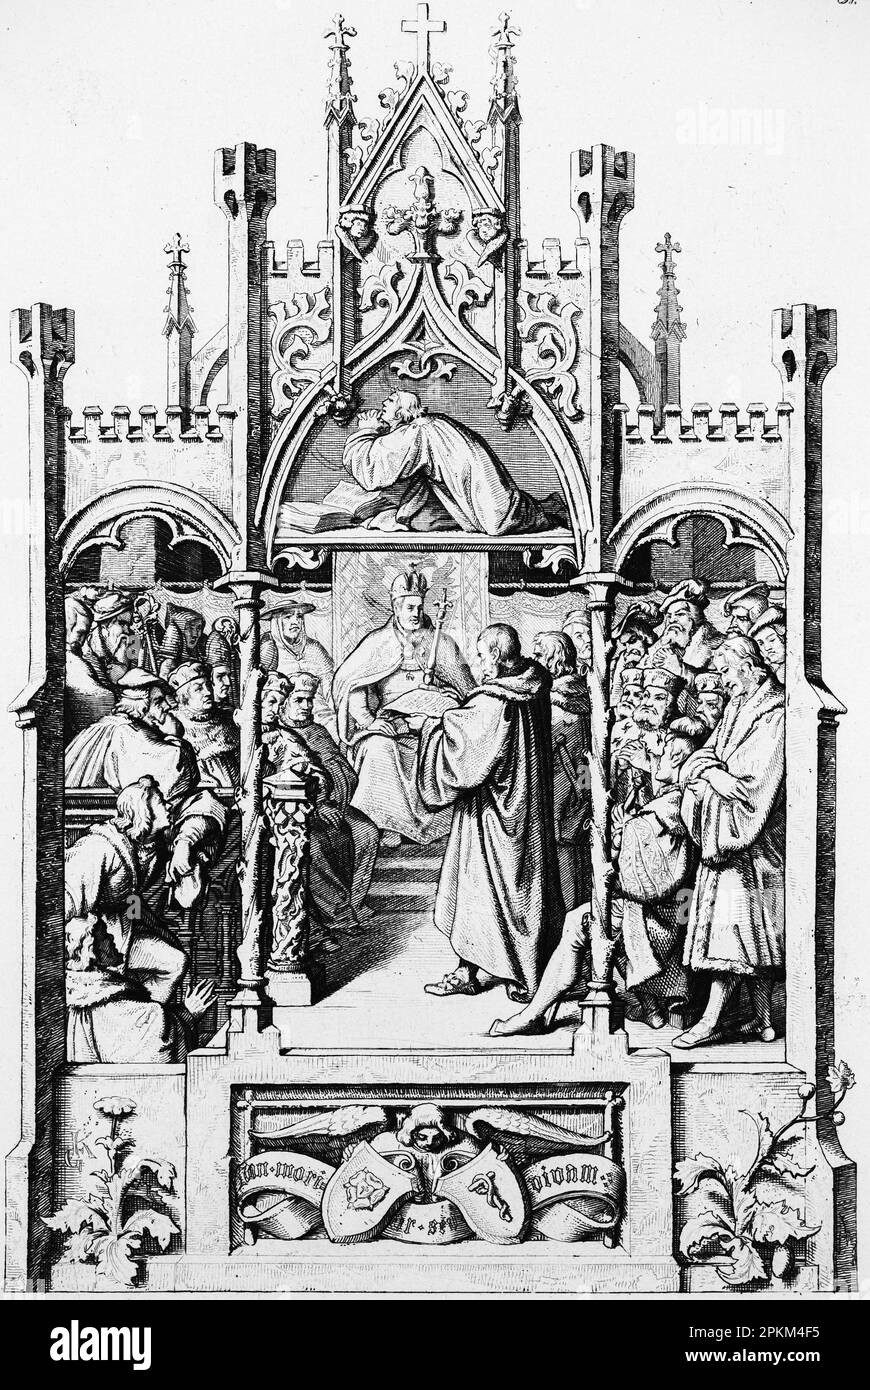 Martin Luther receiving the Augsburg confession or Augustan Confession from the bishop of Augsburg in 1530, historical illustration 1851 Stock Photo